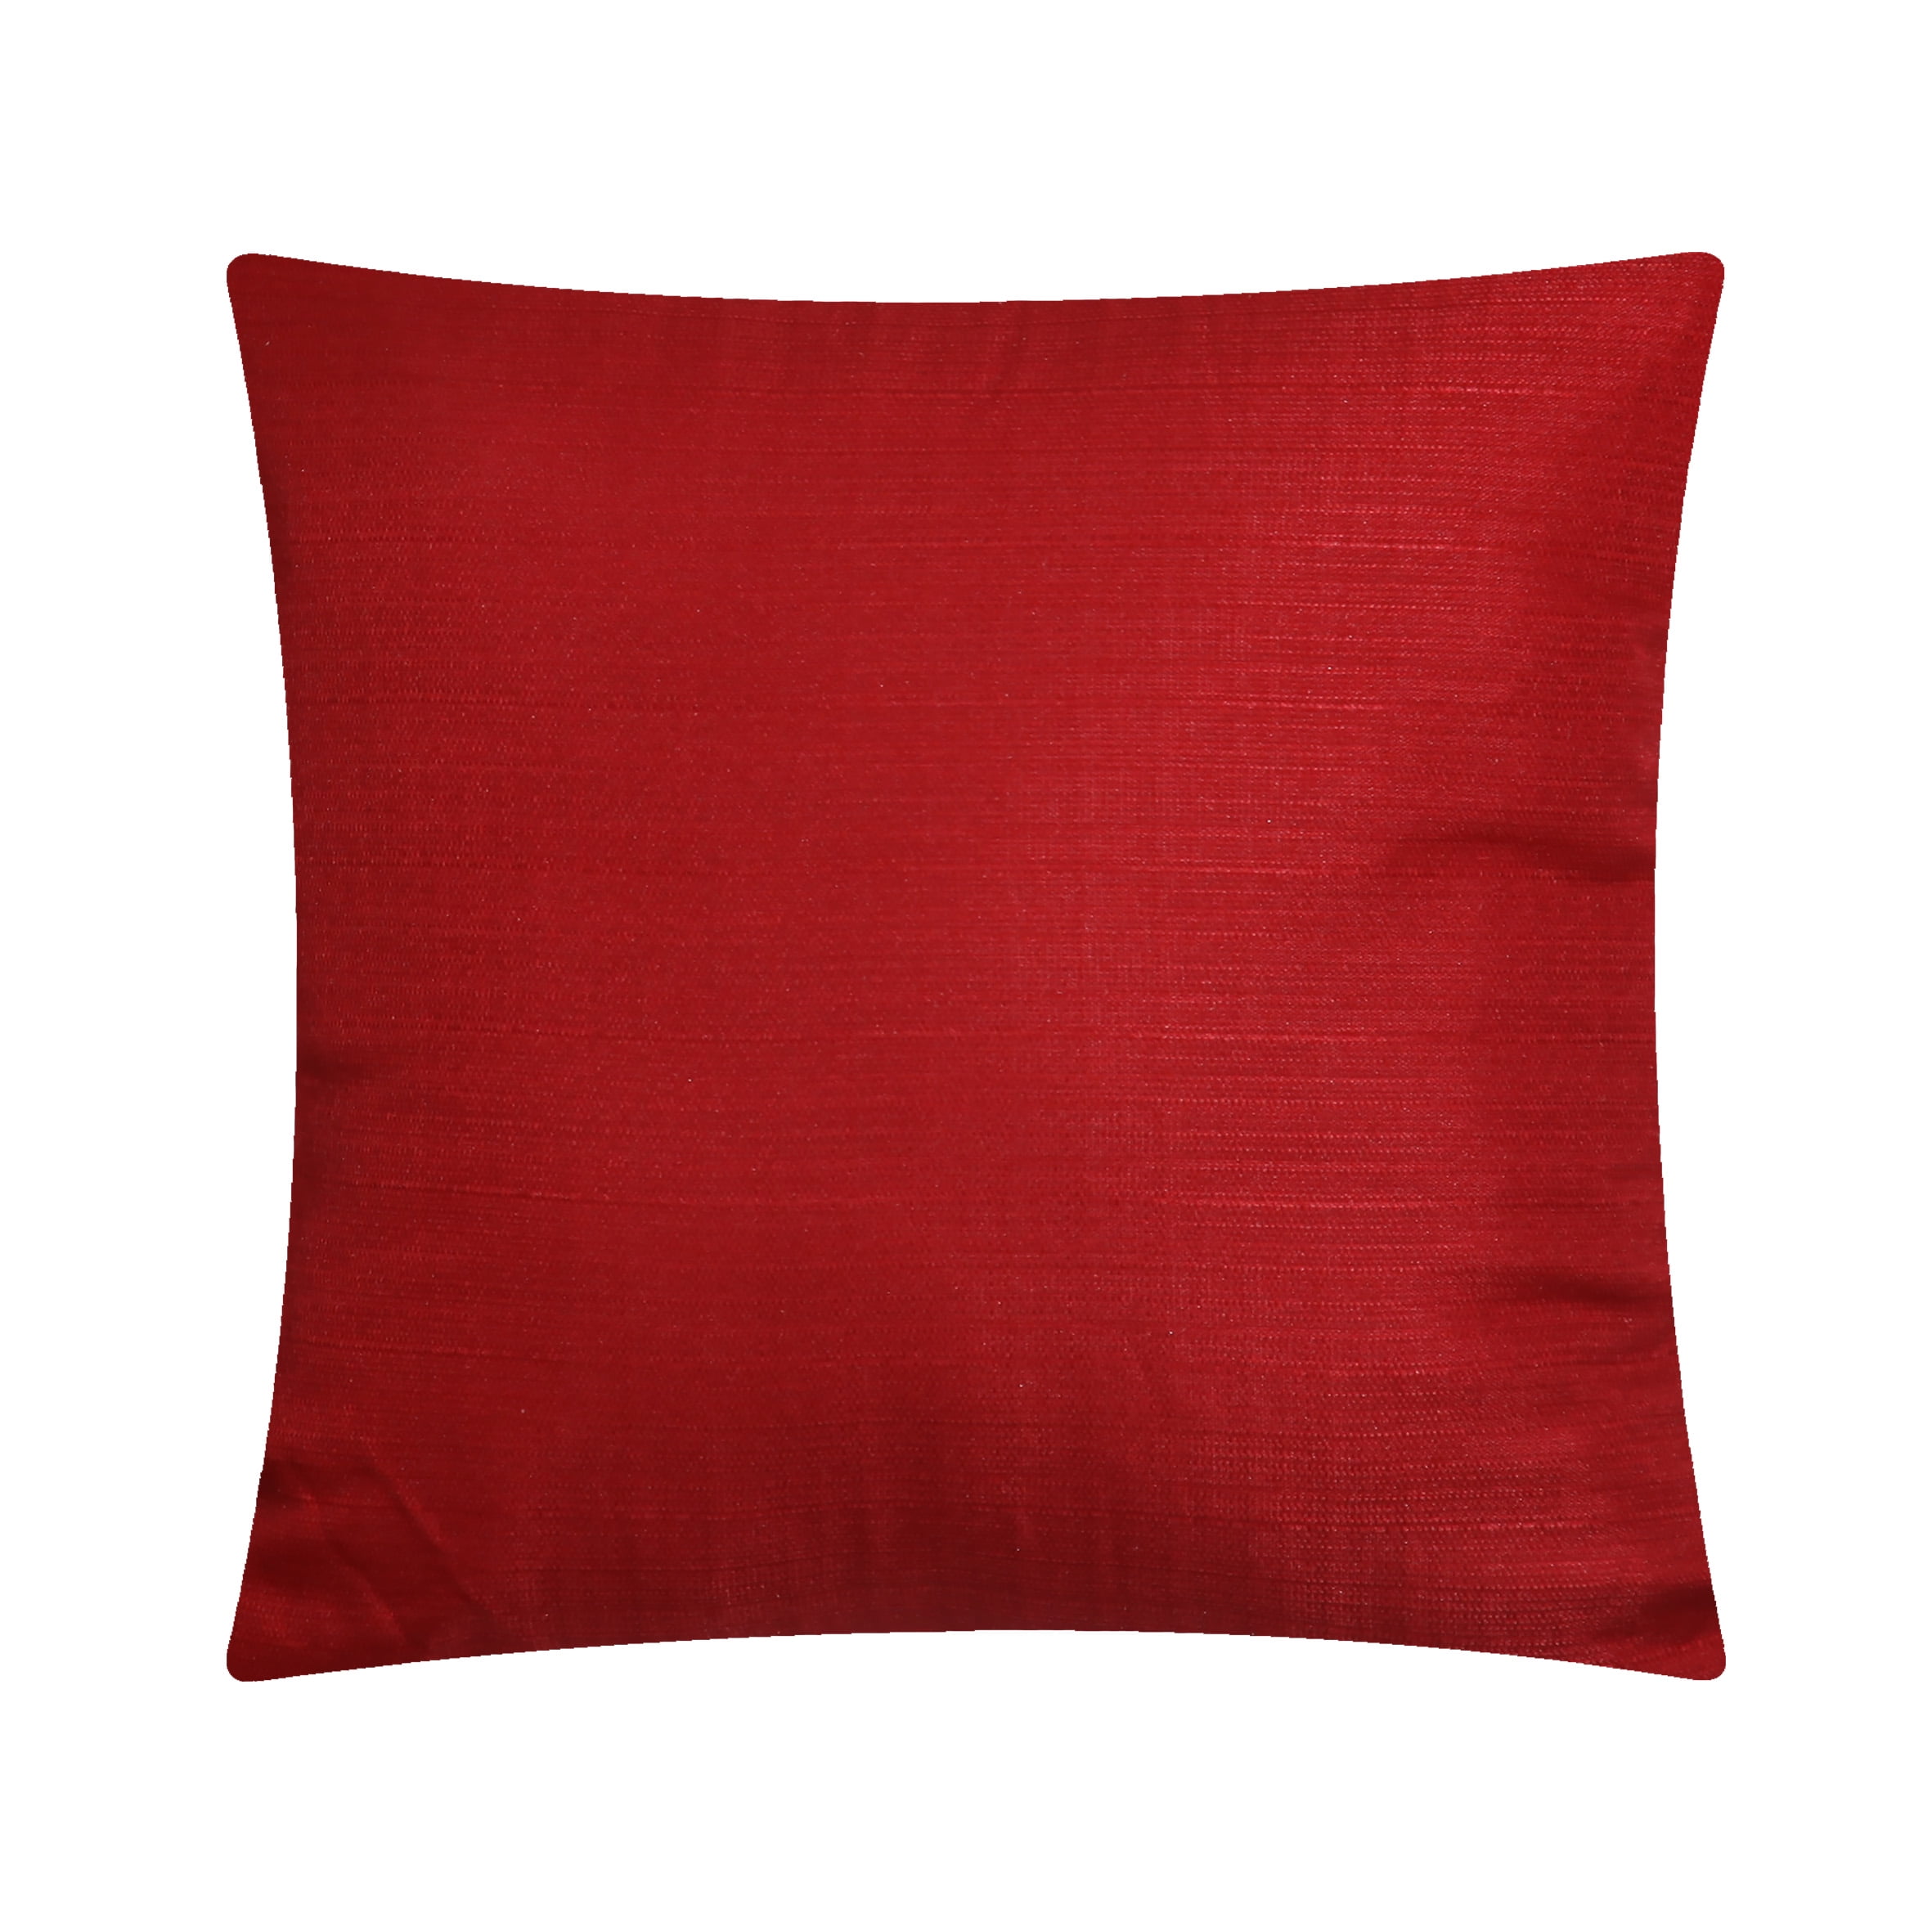 Mainstays Solid Decorative Throw Pillow, 16